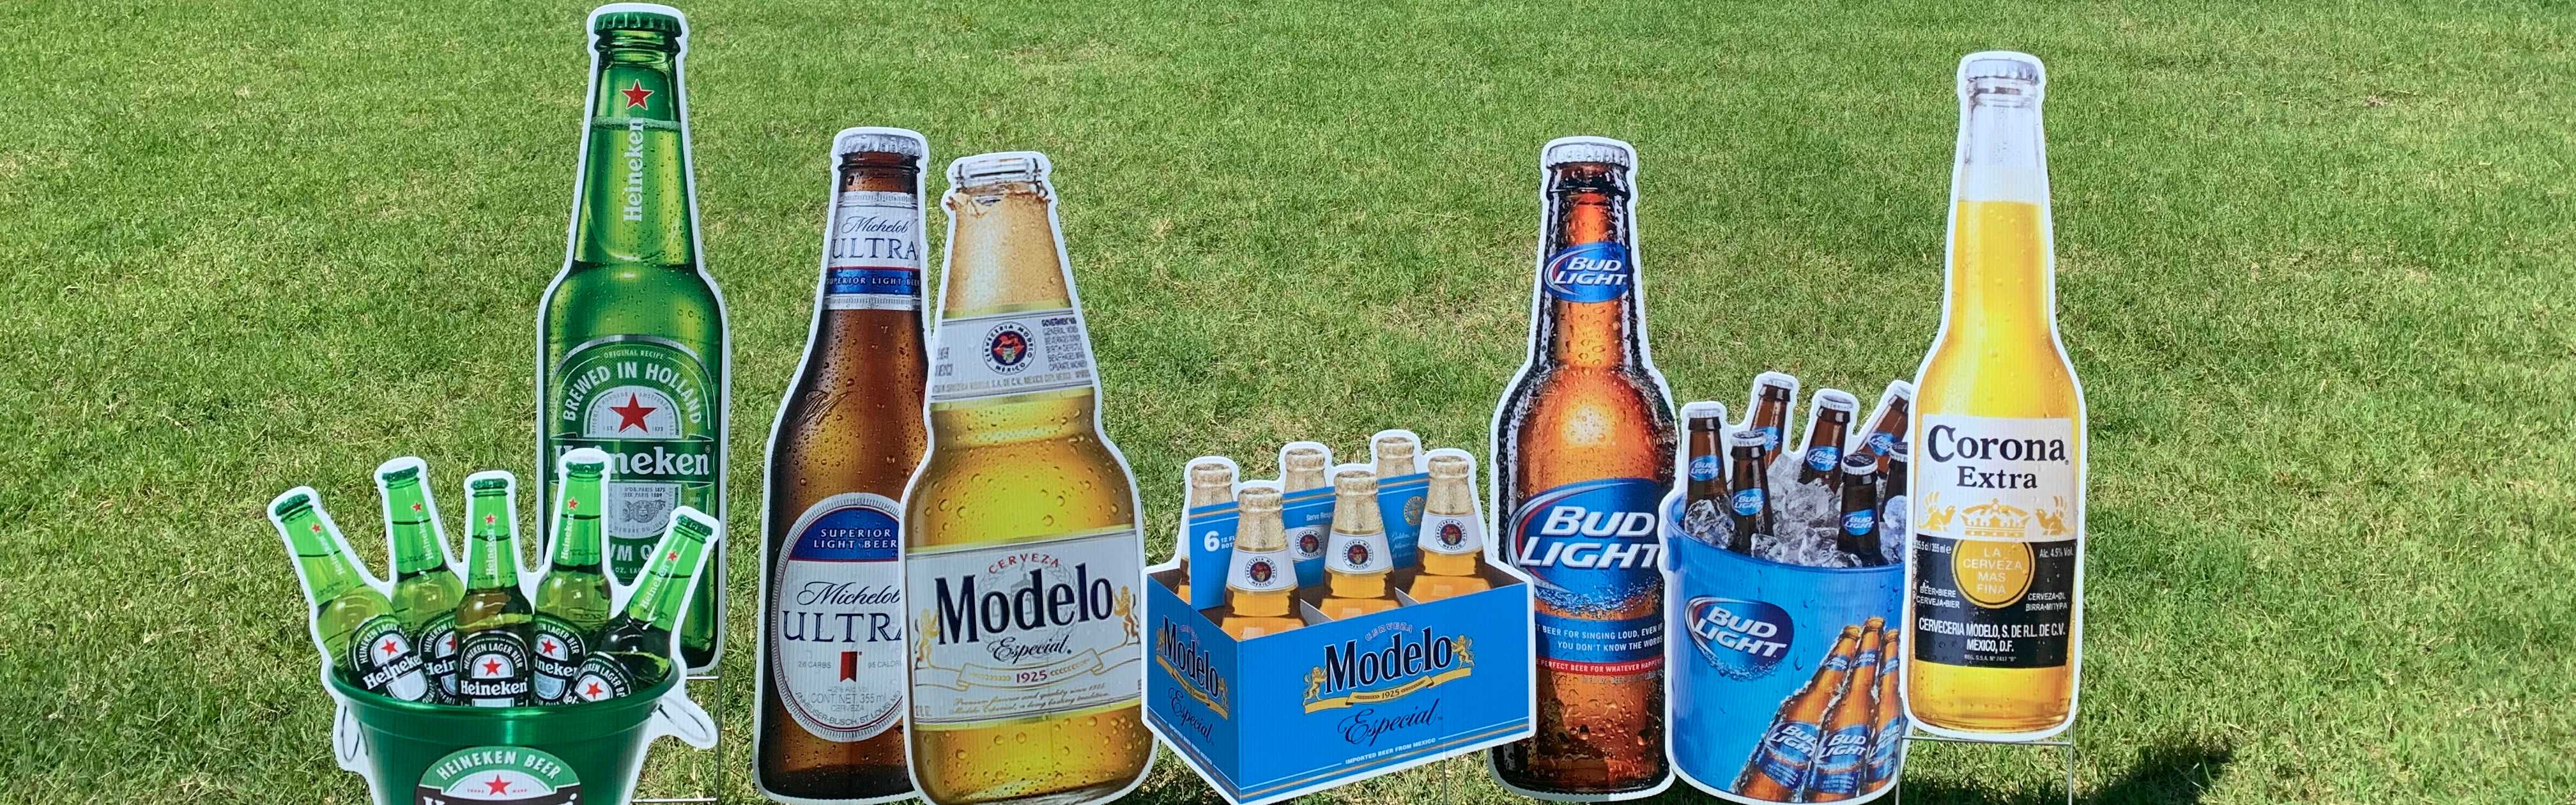 Yard card sign collection beer 